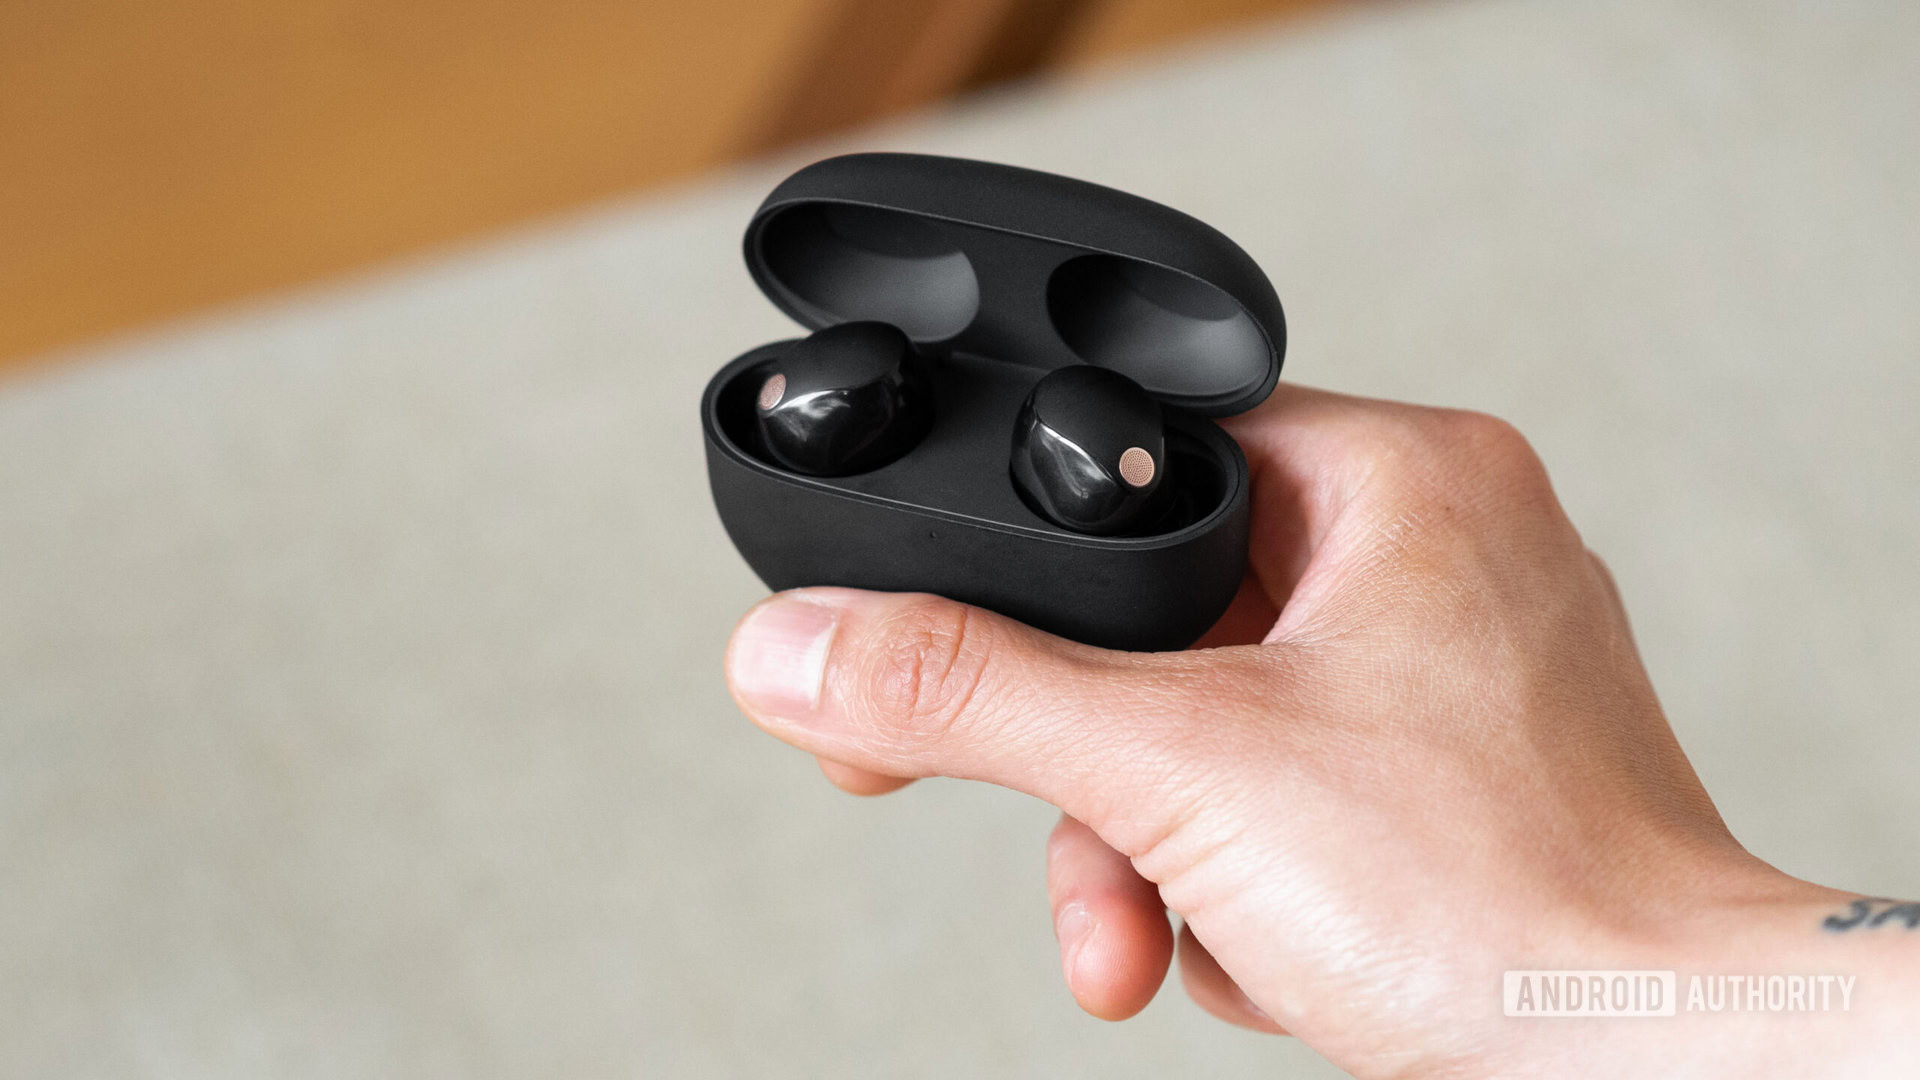 Should you buy these true wireless earbuds?